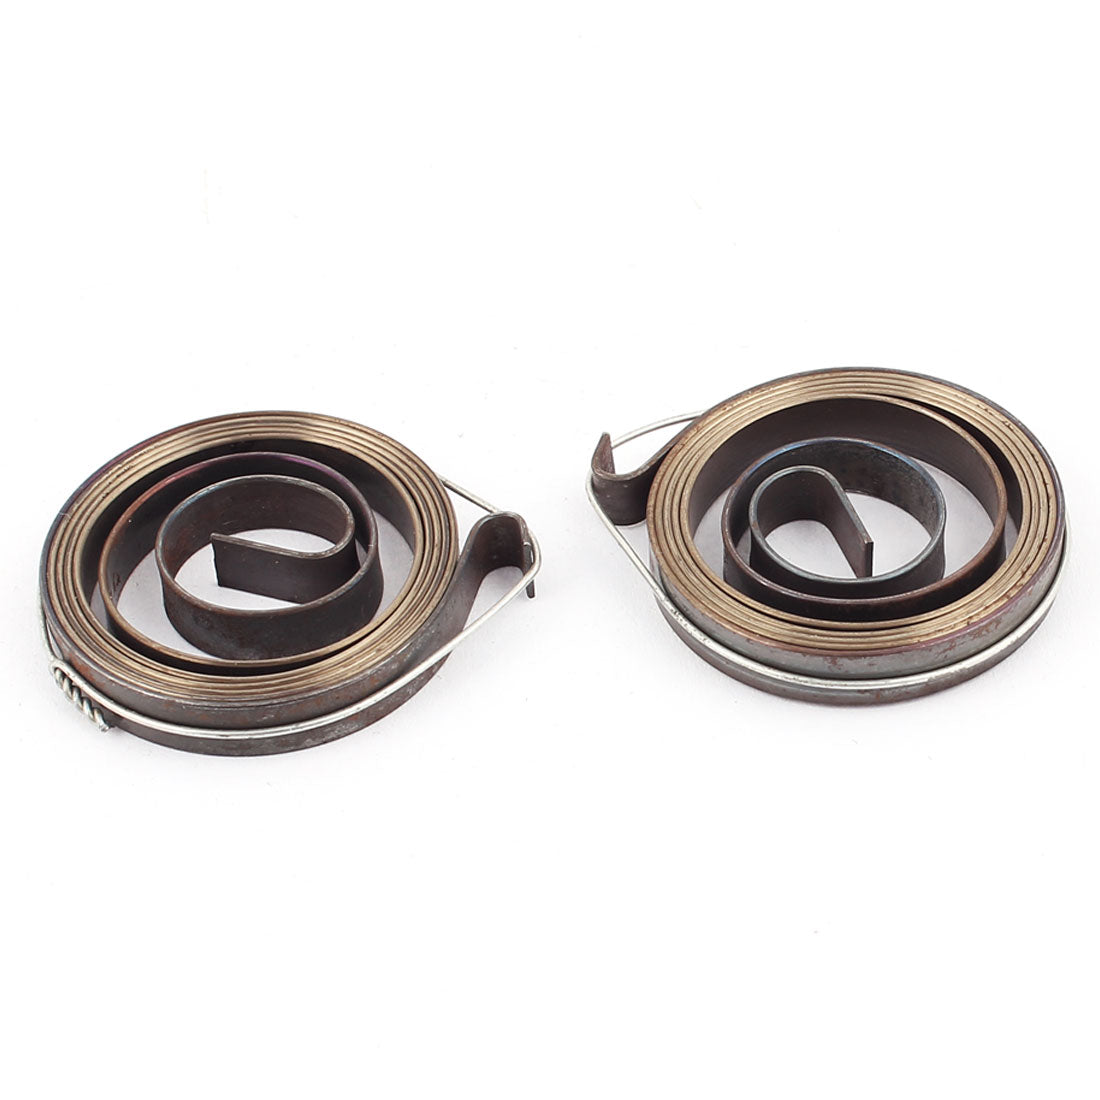 uxcell Uxcell 36 x 6mm Drill Press Quill Feed Return Coil Spring Assembly Bronze Tone 2 Pcs